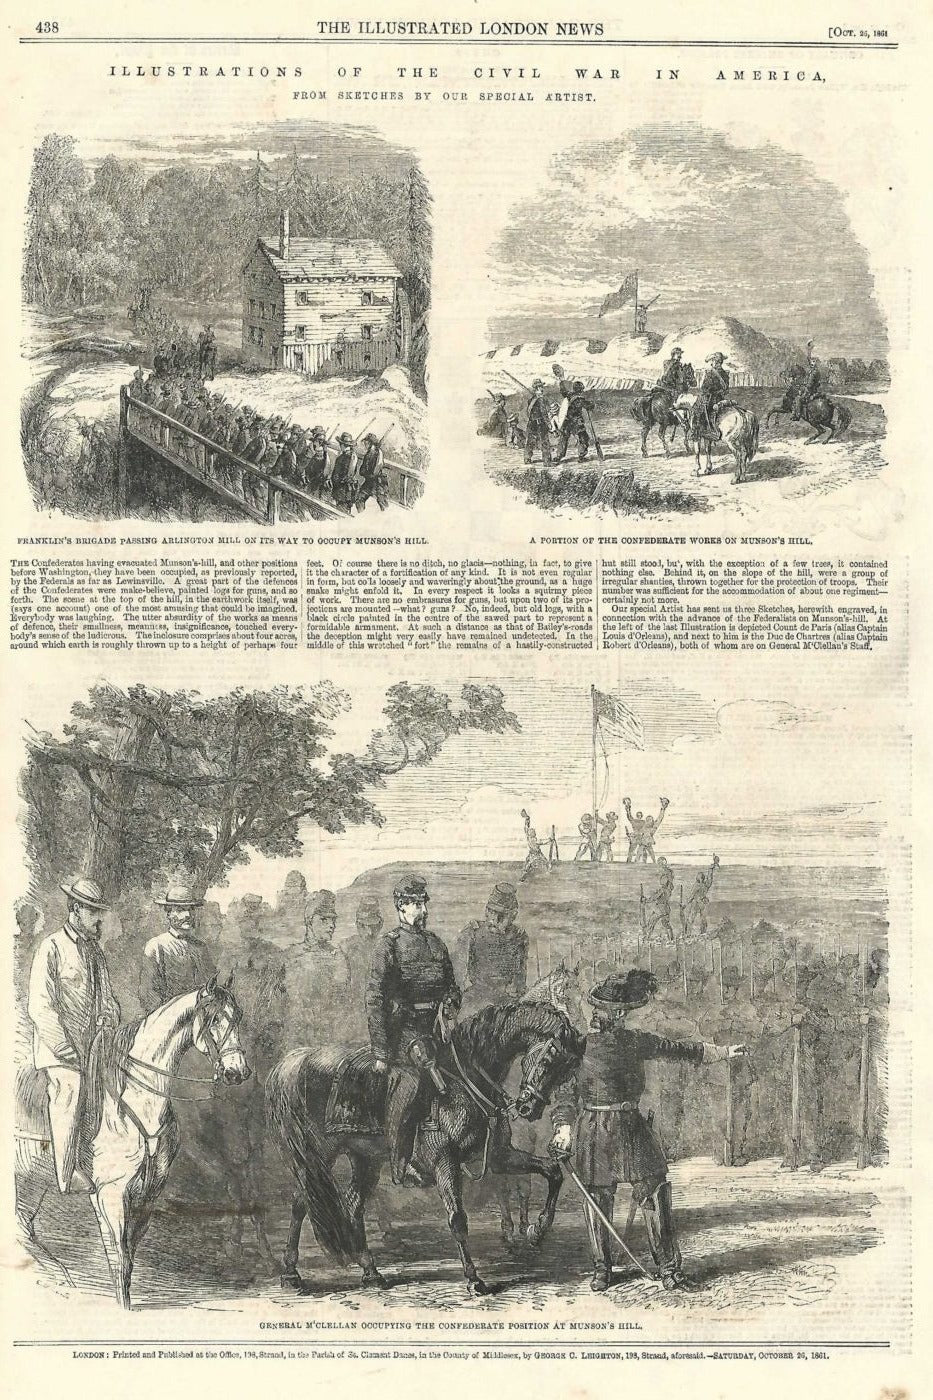 Munsons Hill Confederate held position occupied by General McClellan' Union Army, 1861